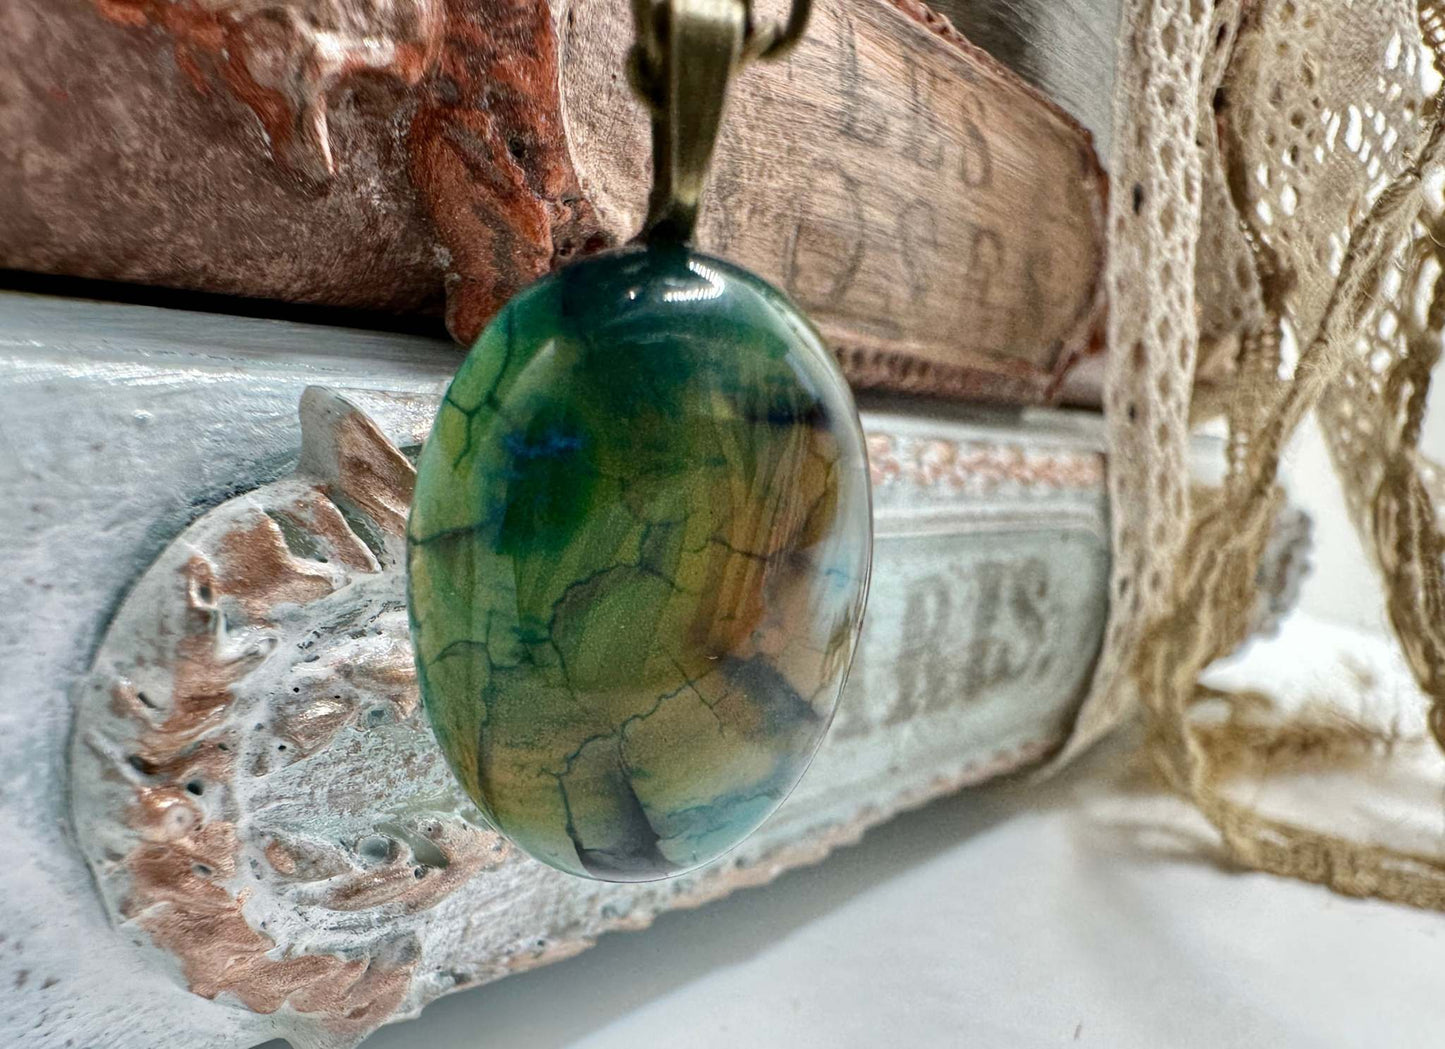 Gemstone Dragon Veins Necklace - Nature's Beauty Captured in a Pendant